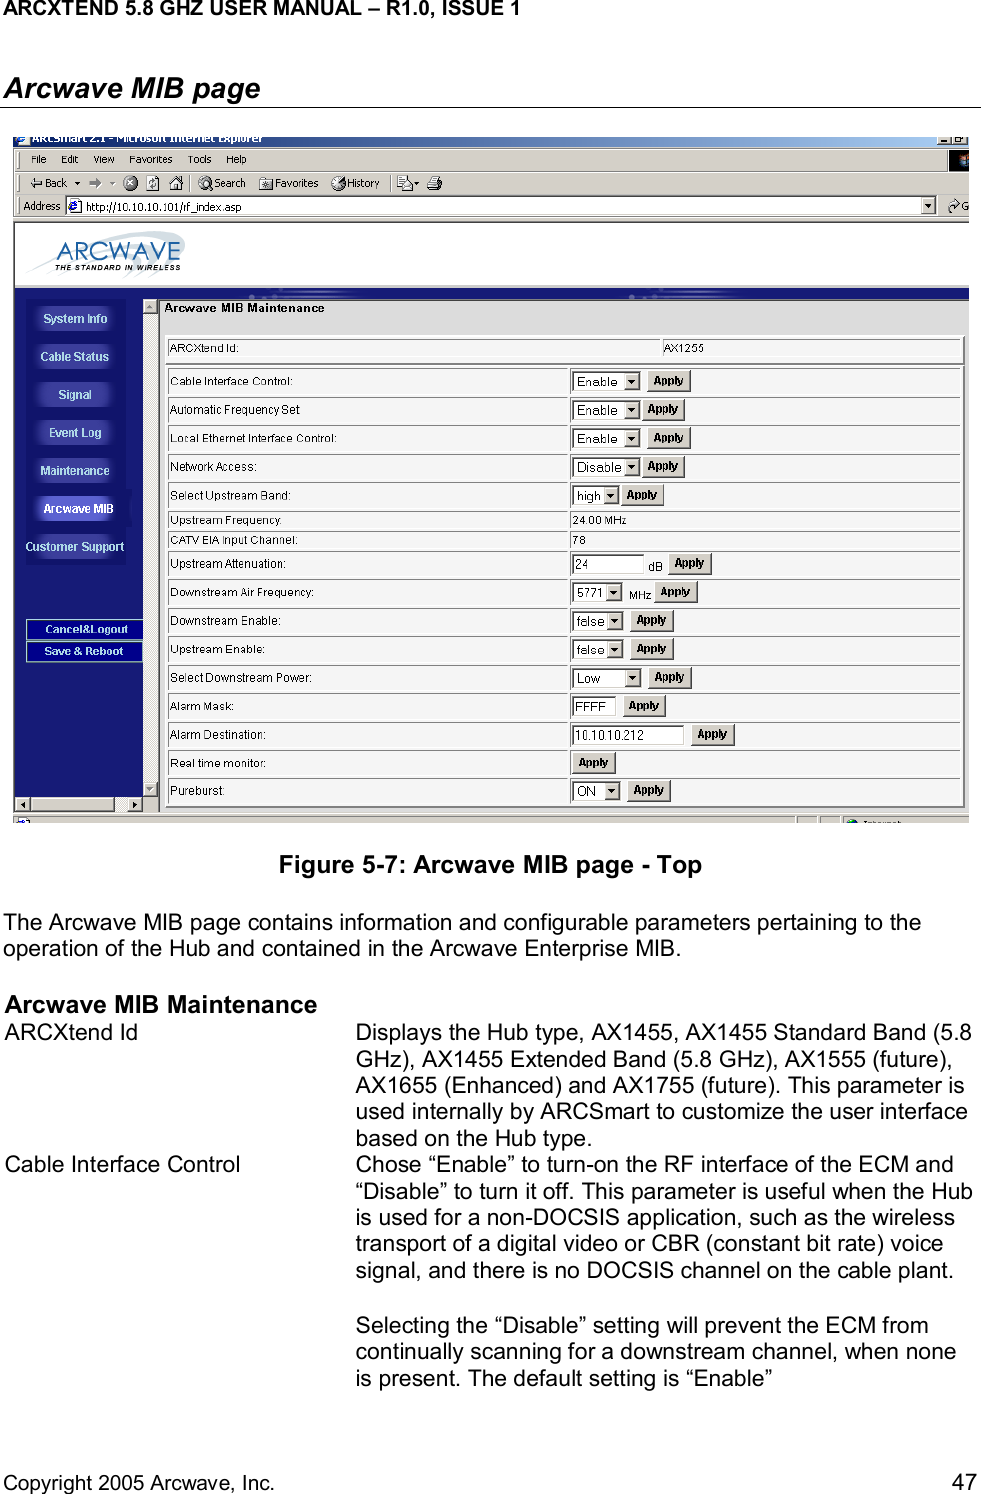 ARCXTEND 5.8 GHZ USER MANUAL – R1.0, ISSUE 1  Copyright 2005 Arcwave, Inc.    47 Arcwave MIB page  Figure 5-7: Arcwave MIB page - Top The Arcwave MIB page contains information and configurable parameters pertaining to the operation of the Hub and contained in the Arcwave Enterprise MIB.  Arcwave MIB Maintenance ARCXtend Id  Displays the Hub type, AX1455, AX1455 Standard Band (5.8 GHz), AX1455 Extended Band (5.8 GHz), AX1555 (future), AX1655 (Enhanced) and AX1755 (future). This parameter is used internally by ARCSmart to customize the user interface based on the Hub type.  Cable Interface Control  Chose “Enable” to turn-on the RF interface of the ECM and “Disable” to turn it off. This parameter is useful when the Hub is used for a non-DOCSIS application, such as the wireless transport of a digital video or CBR (constant bit rate) voice signal, and there is no DOCSIS channel on the cable plant.  Selecting the “Disable” setting will prevent the ECM from continually scanning for a downstream channel, when none is present. The default setting is “Enable”  